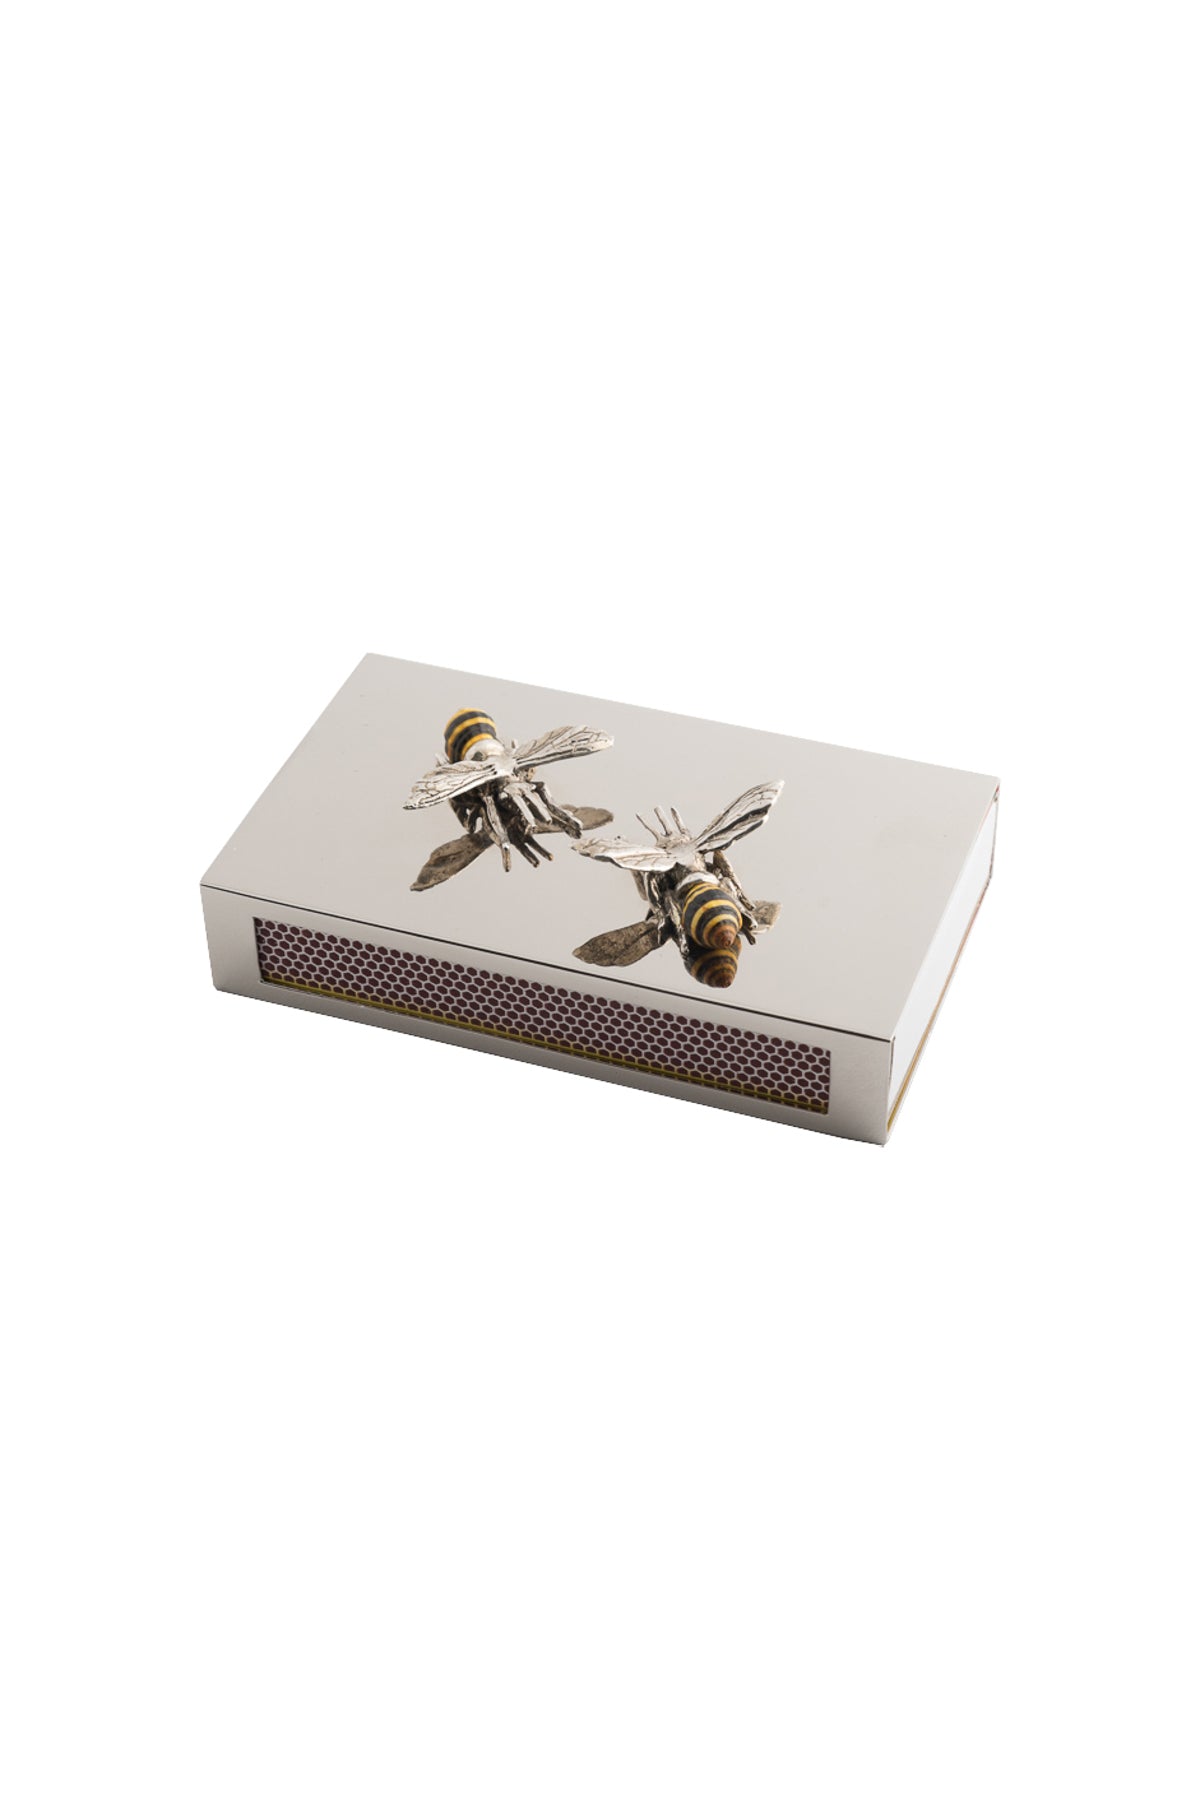 Silver Match Box Cover - Bees